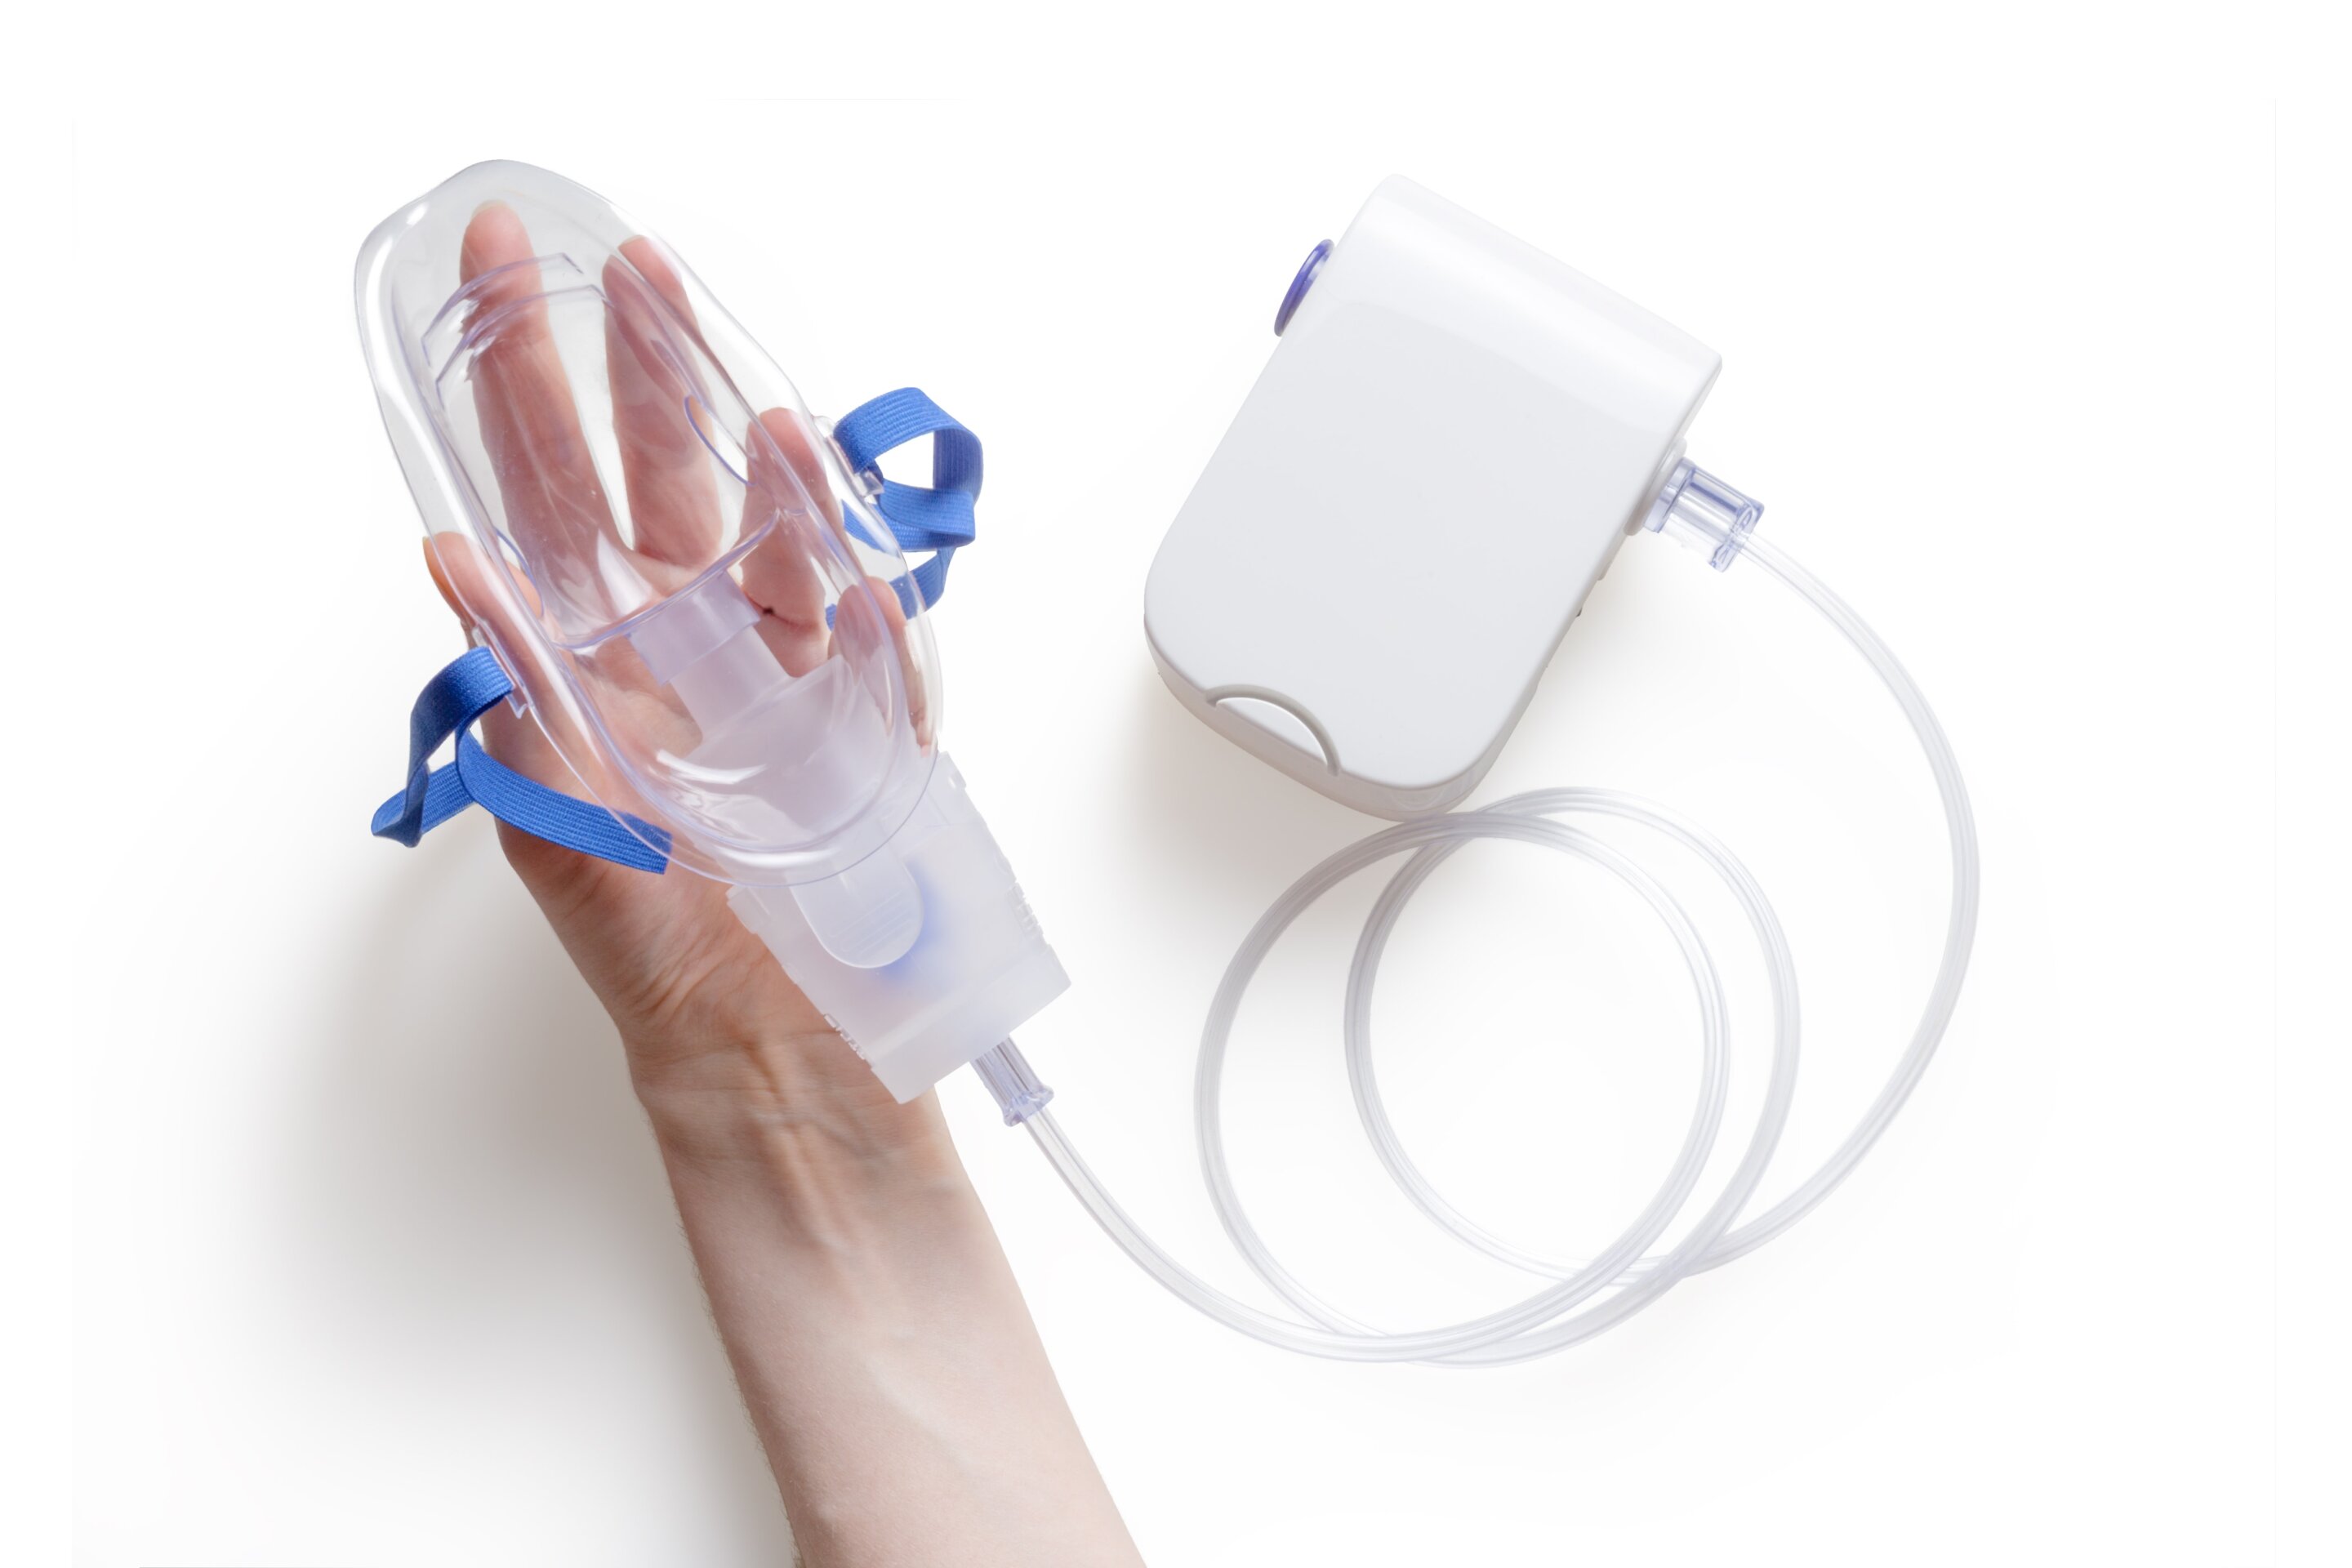 #Researchers develop hands-free device that improves breathing in people with COPD